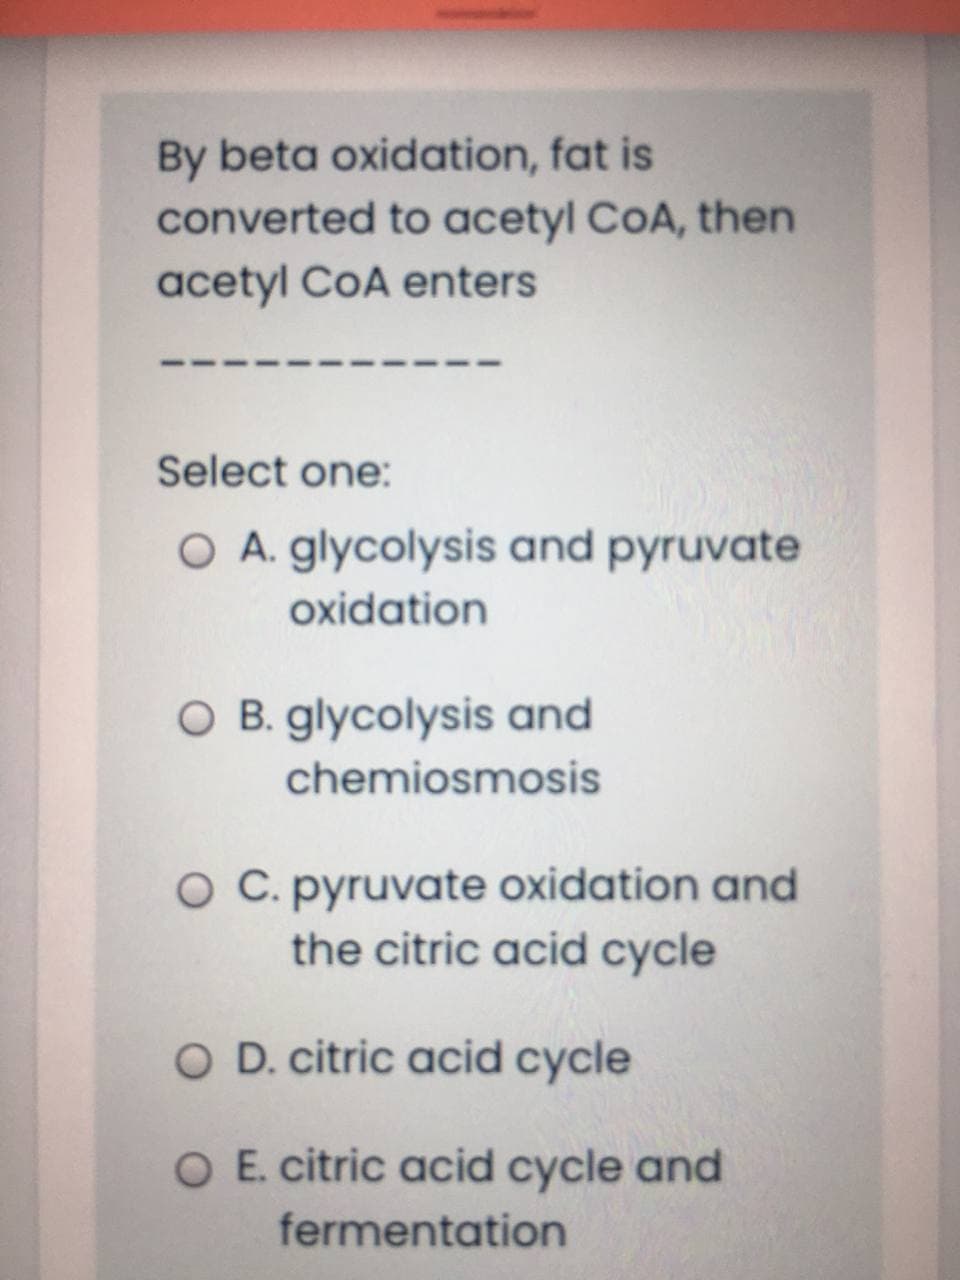 By beta oxidation, fat is
converted to acetyl CoA, then
acetyl CoA enters
Select one:
O A. glycolysis and pyruvate
oxidation
O B. glycolysis and
chemiosmosis
O C. pyruvate oxidation and
the citric acid cycle
O D. citric acid cycle
O E. citric acid cycle and
fermentation
